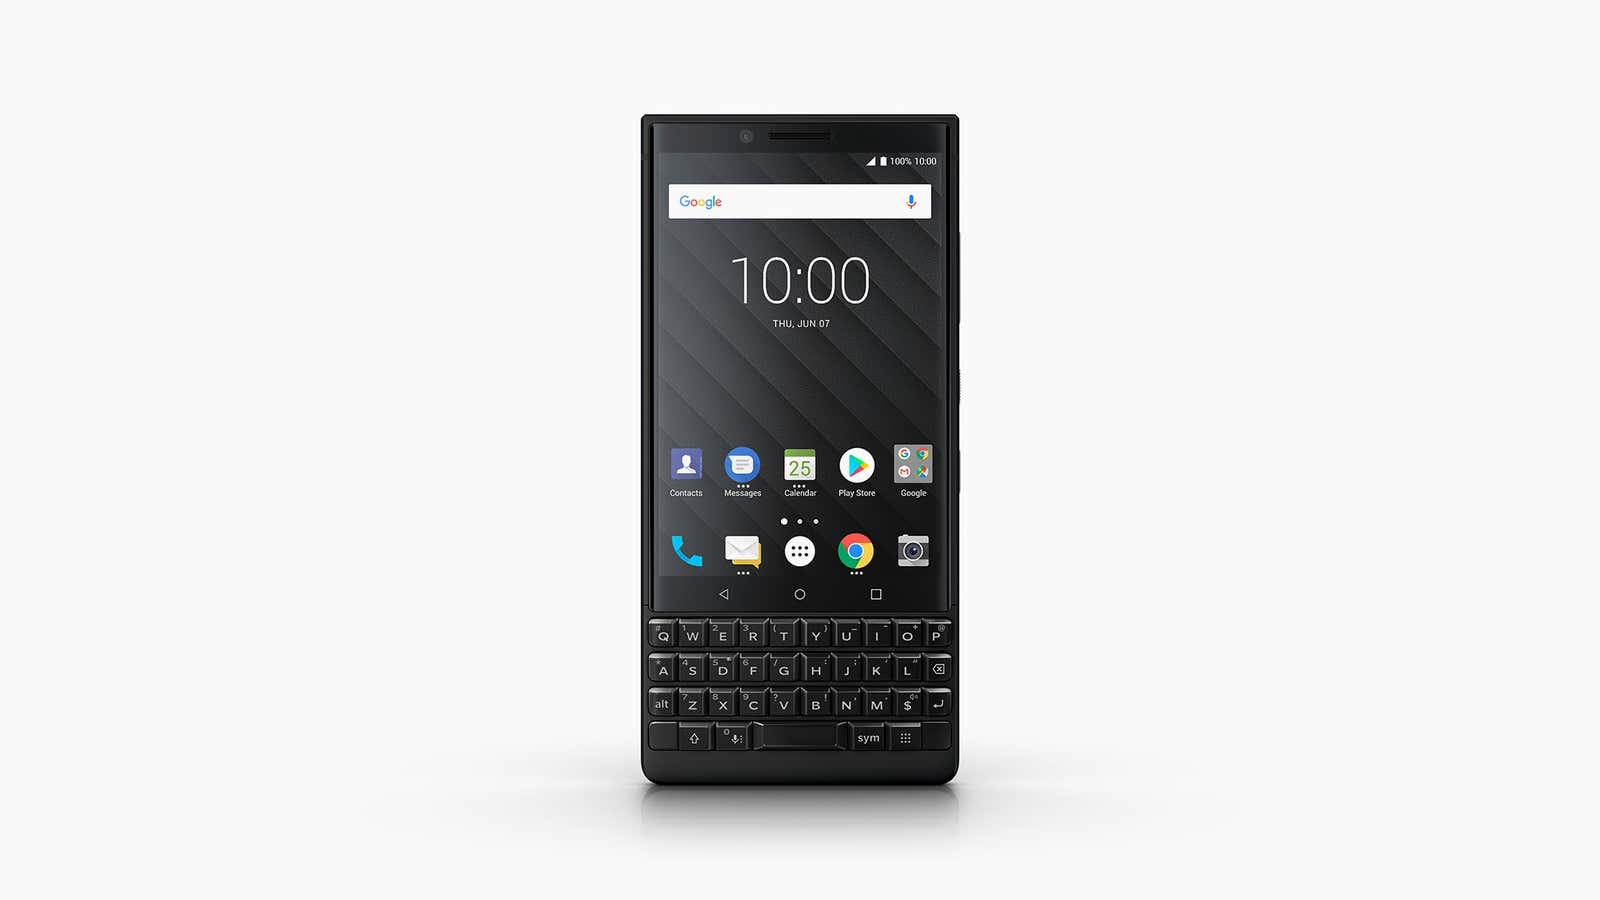 The BlackBerry Key2. You can continue to live without it.